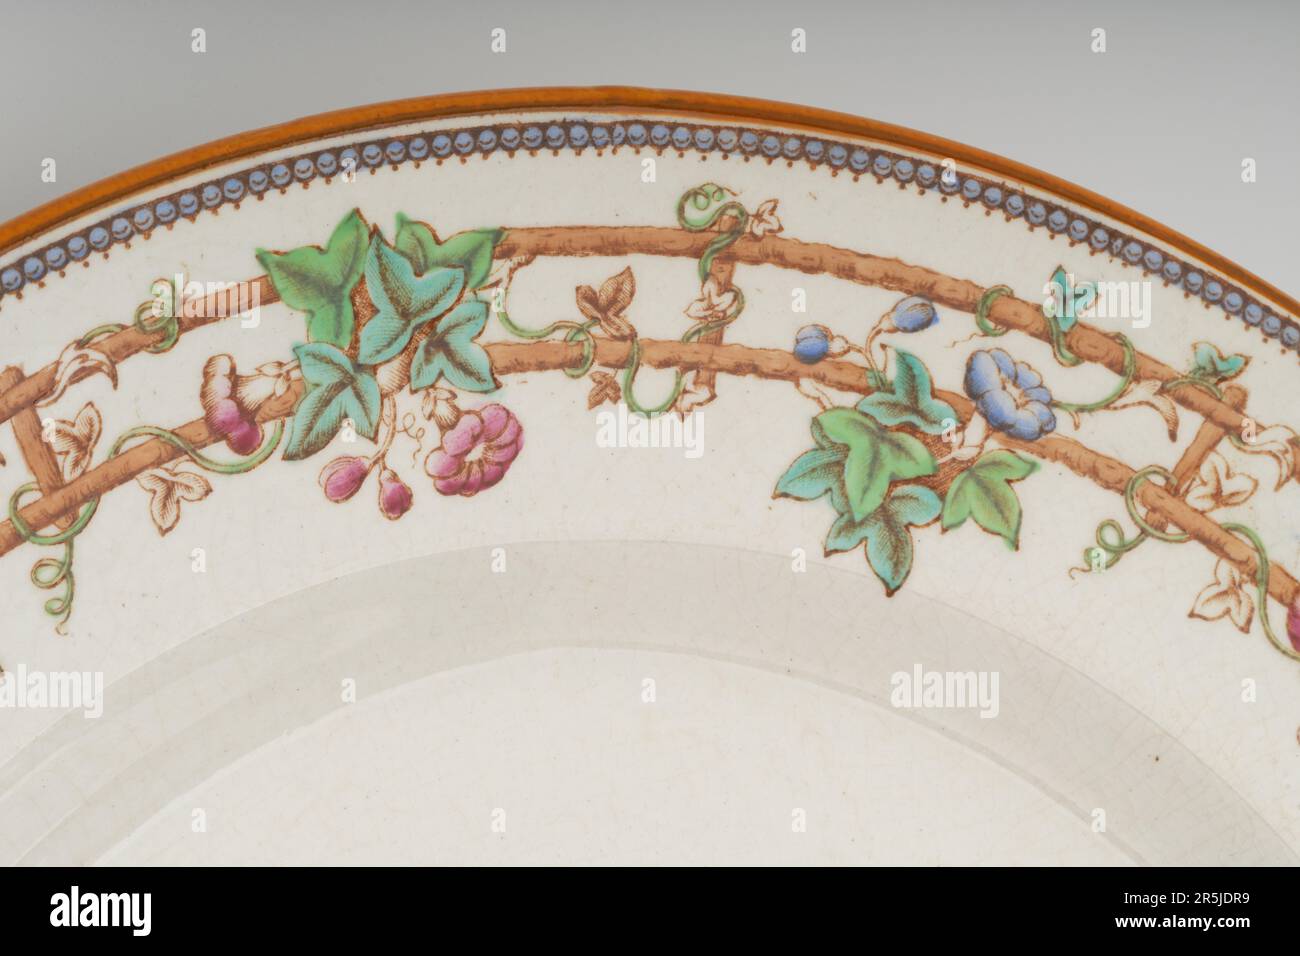 Fine detail of a china clay dinner plate. Painted flowers and trellis work. Morning glory climbing vine flowering plant. Stock Photo